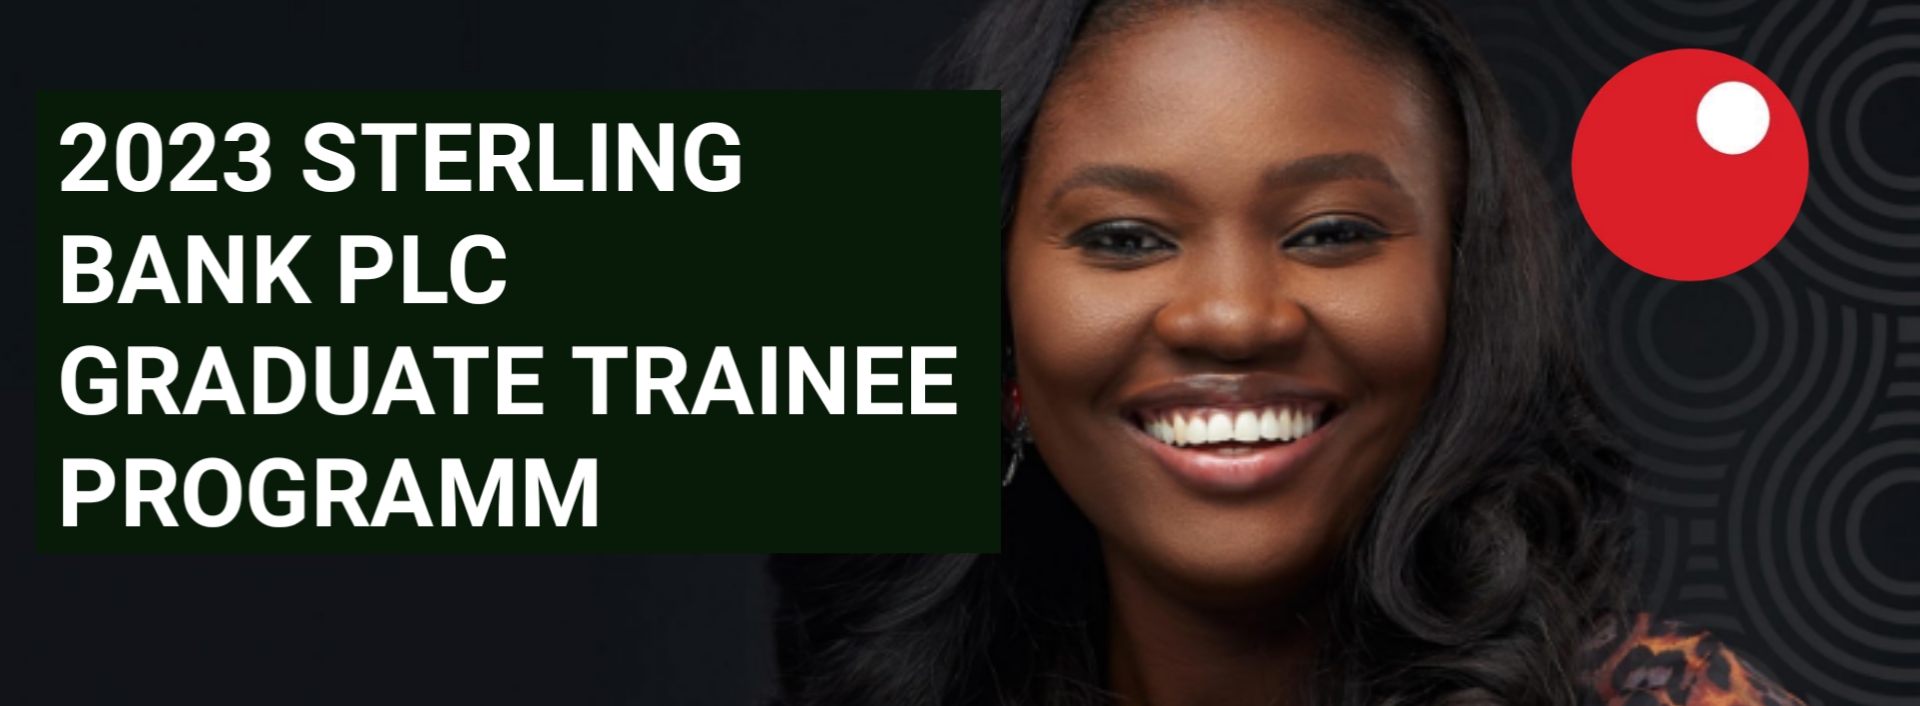 Sterling Bank Graduate Trainee Programme 2023 | How To Apply